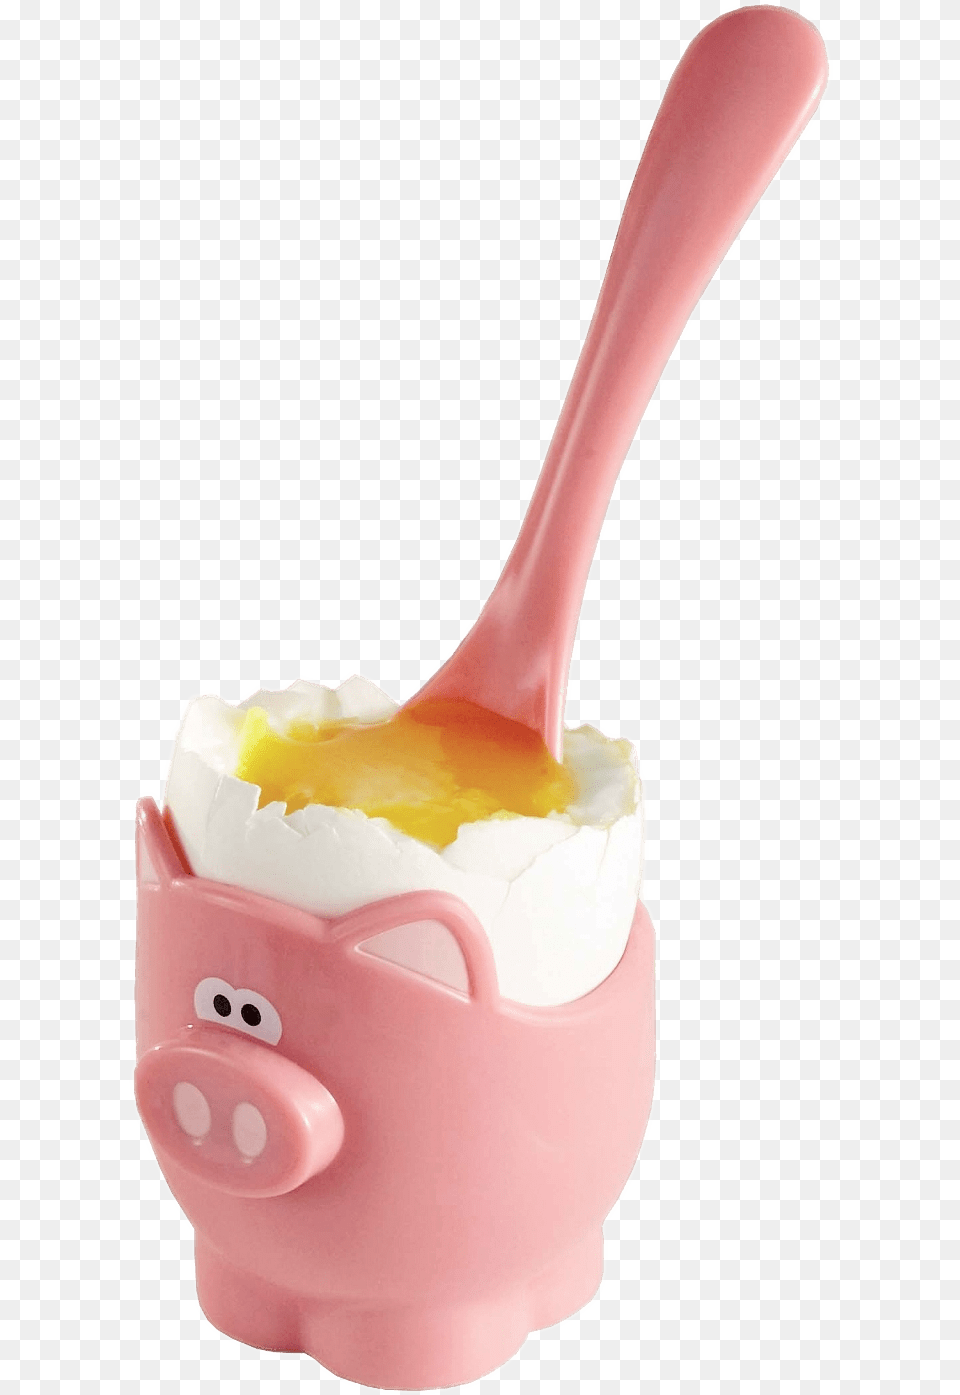 Piggy Egg Cup And Spoon Egg Cup And Spoon, Cutlery, Smoke Pipe, Food, Cream Png